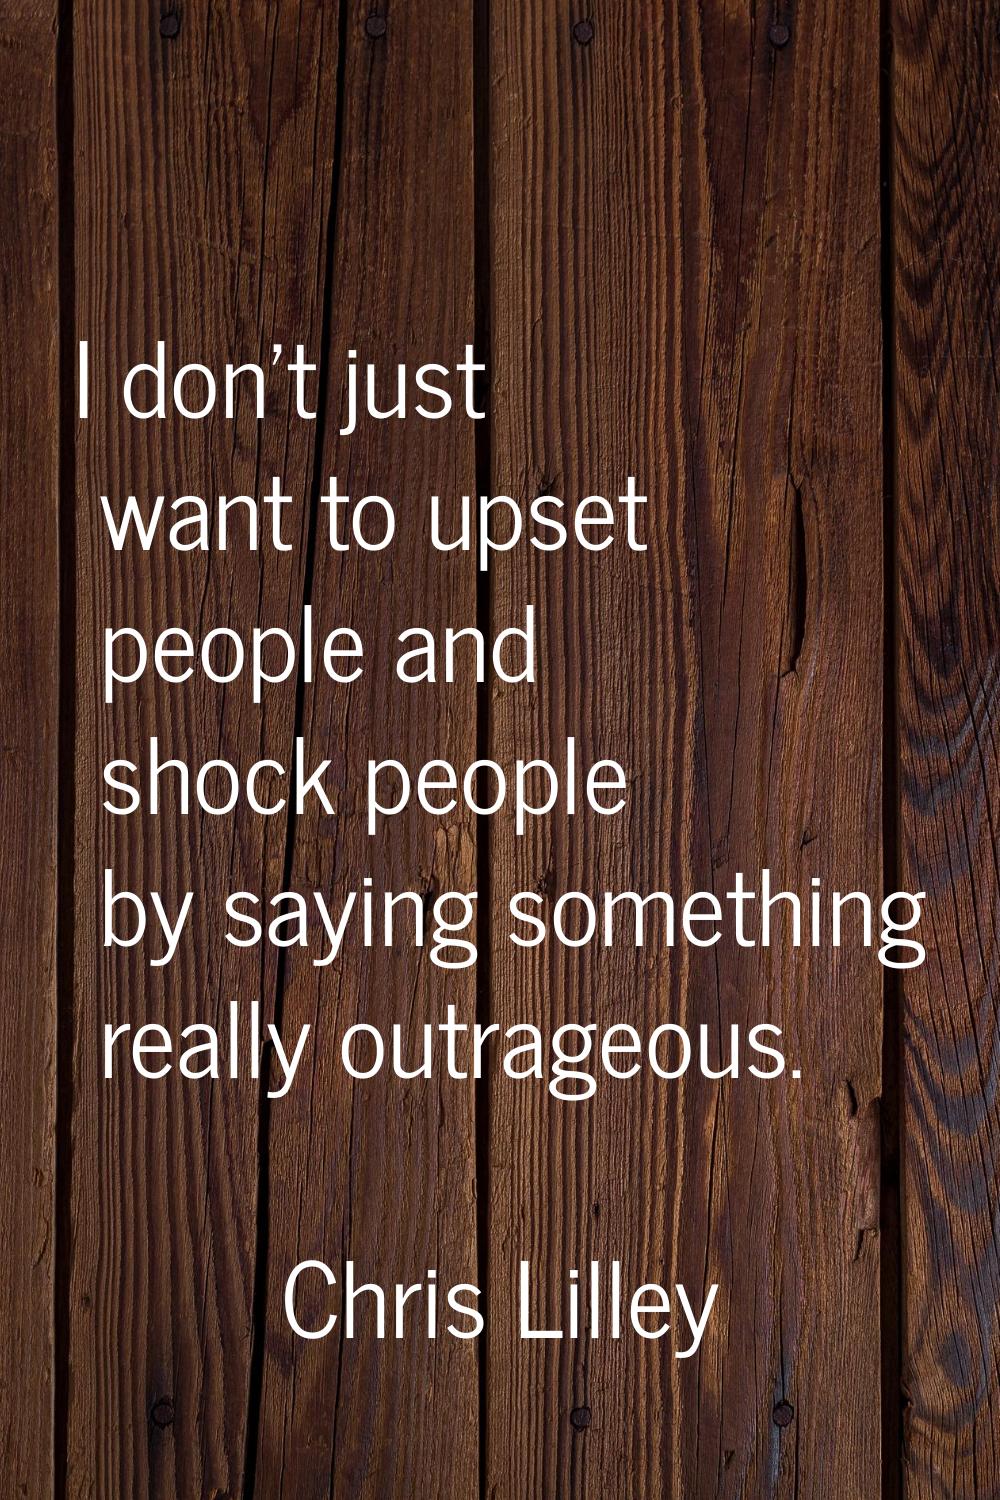 I don't just want to upset people and shock people by saying something really outrageous.